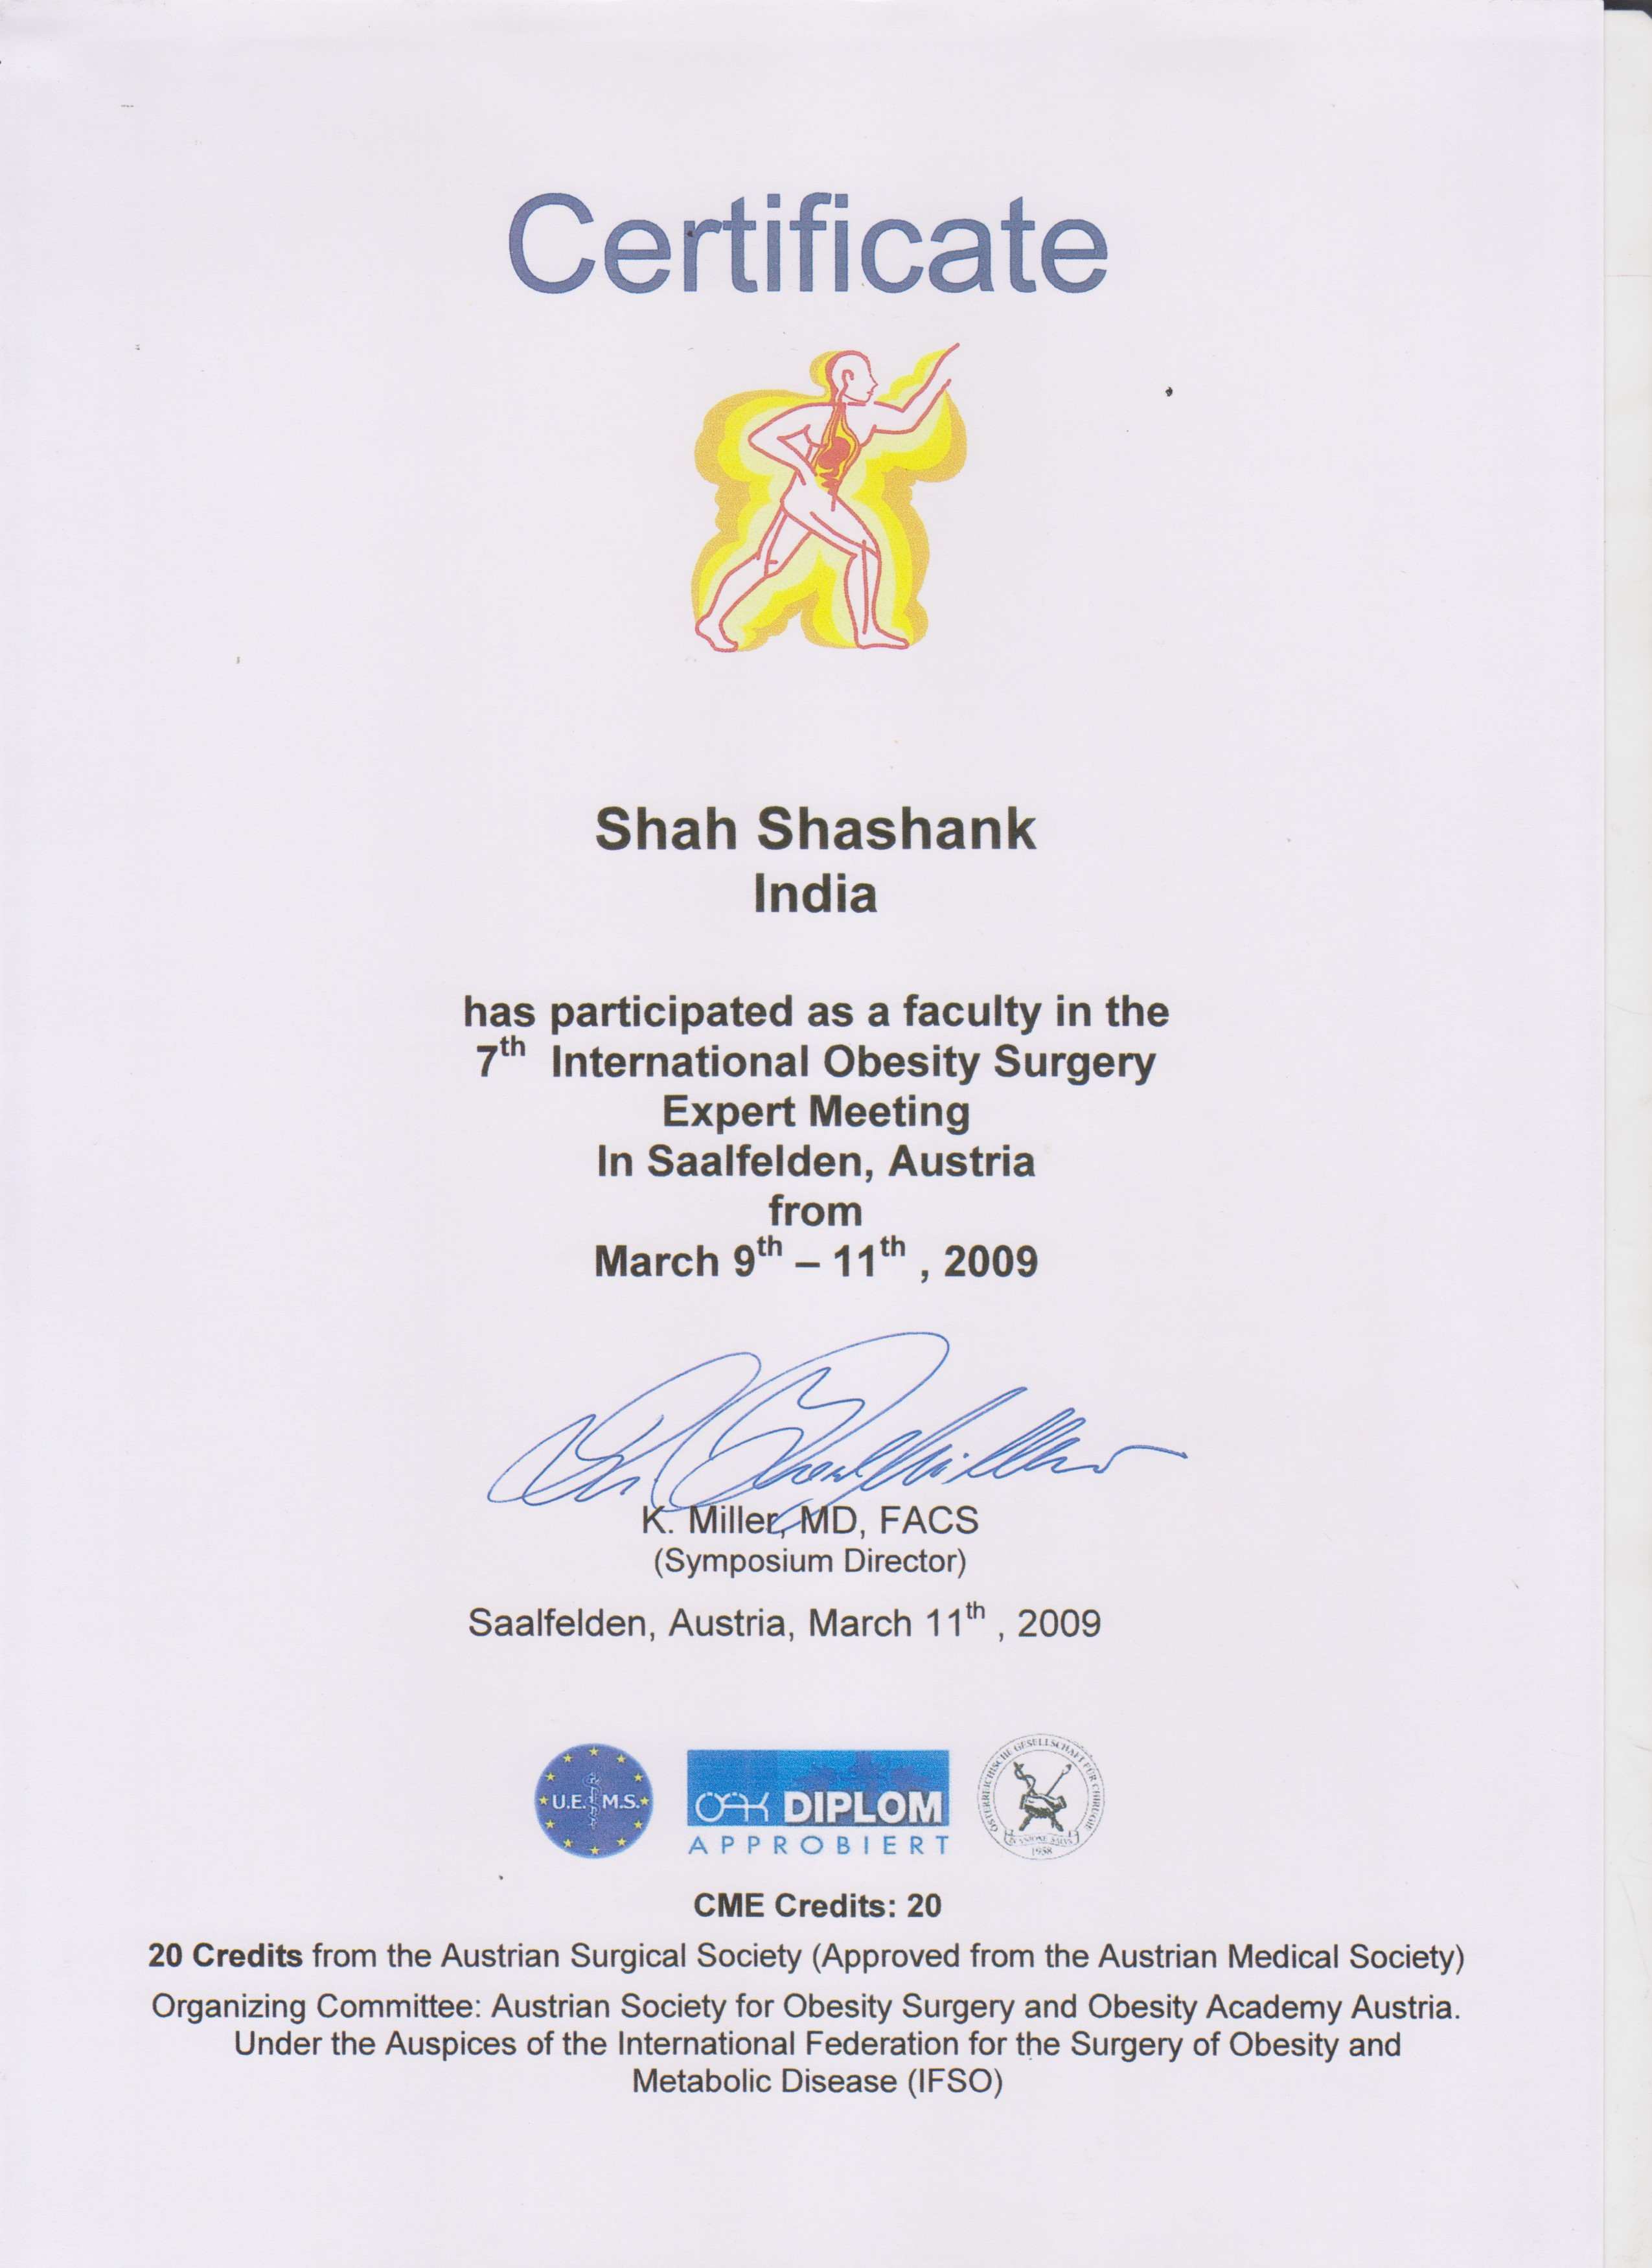 Dr Shashank Shah has participated as a Faculty at the Obesity Surgery Expert Meeting held in Austria in 2009. 